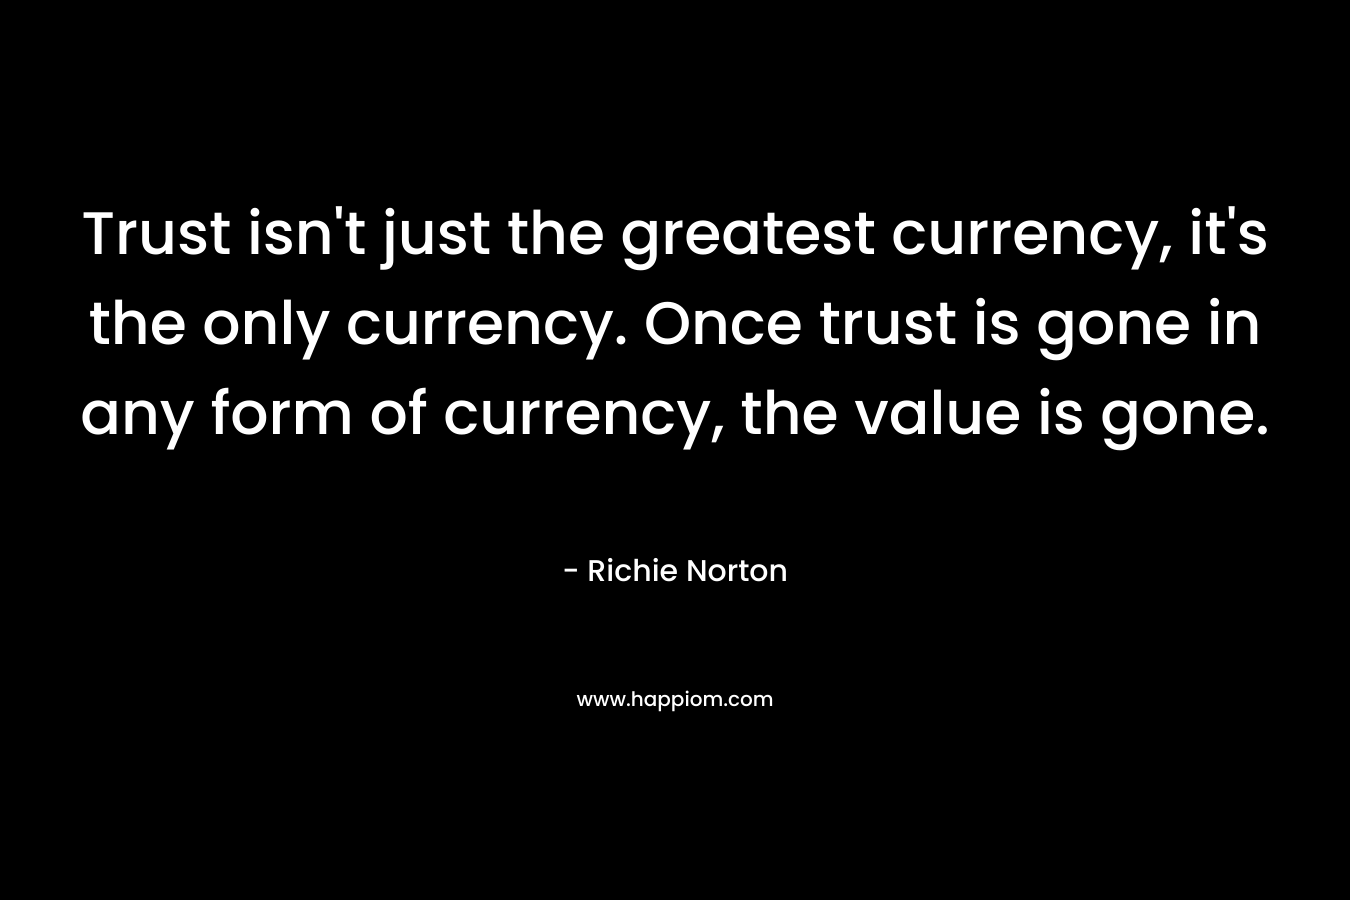 Trust isn't just the greatest currency, it's the only currency. Once trust is gone in any form of currency, the value is gone.